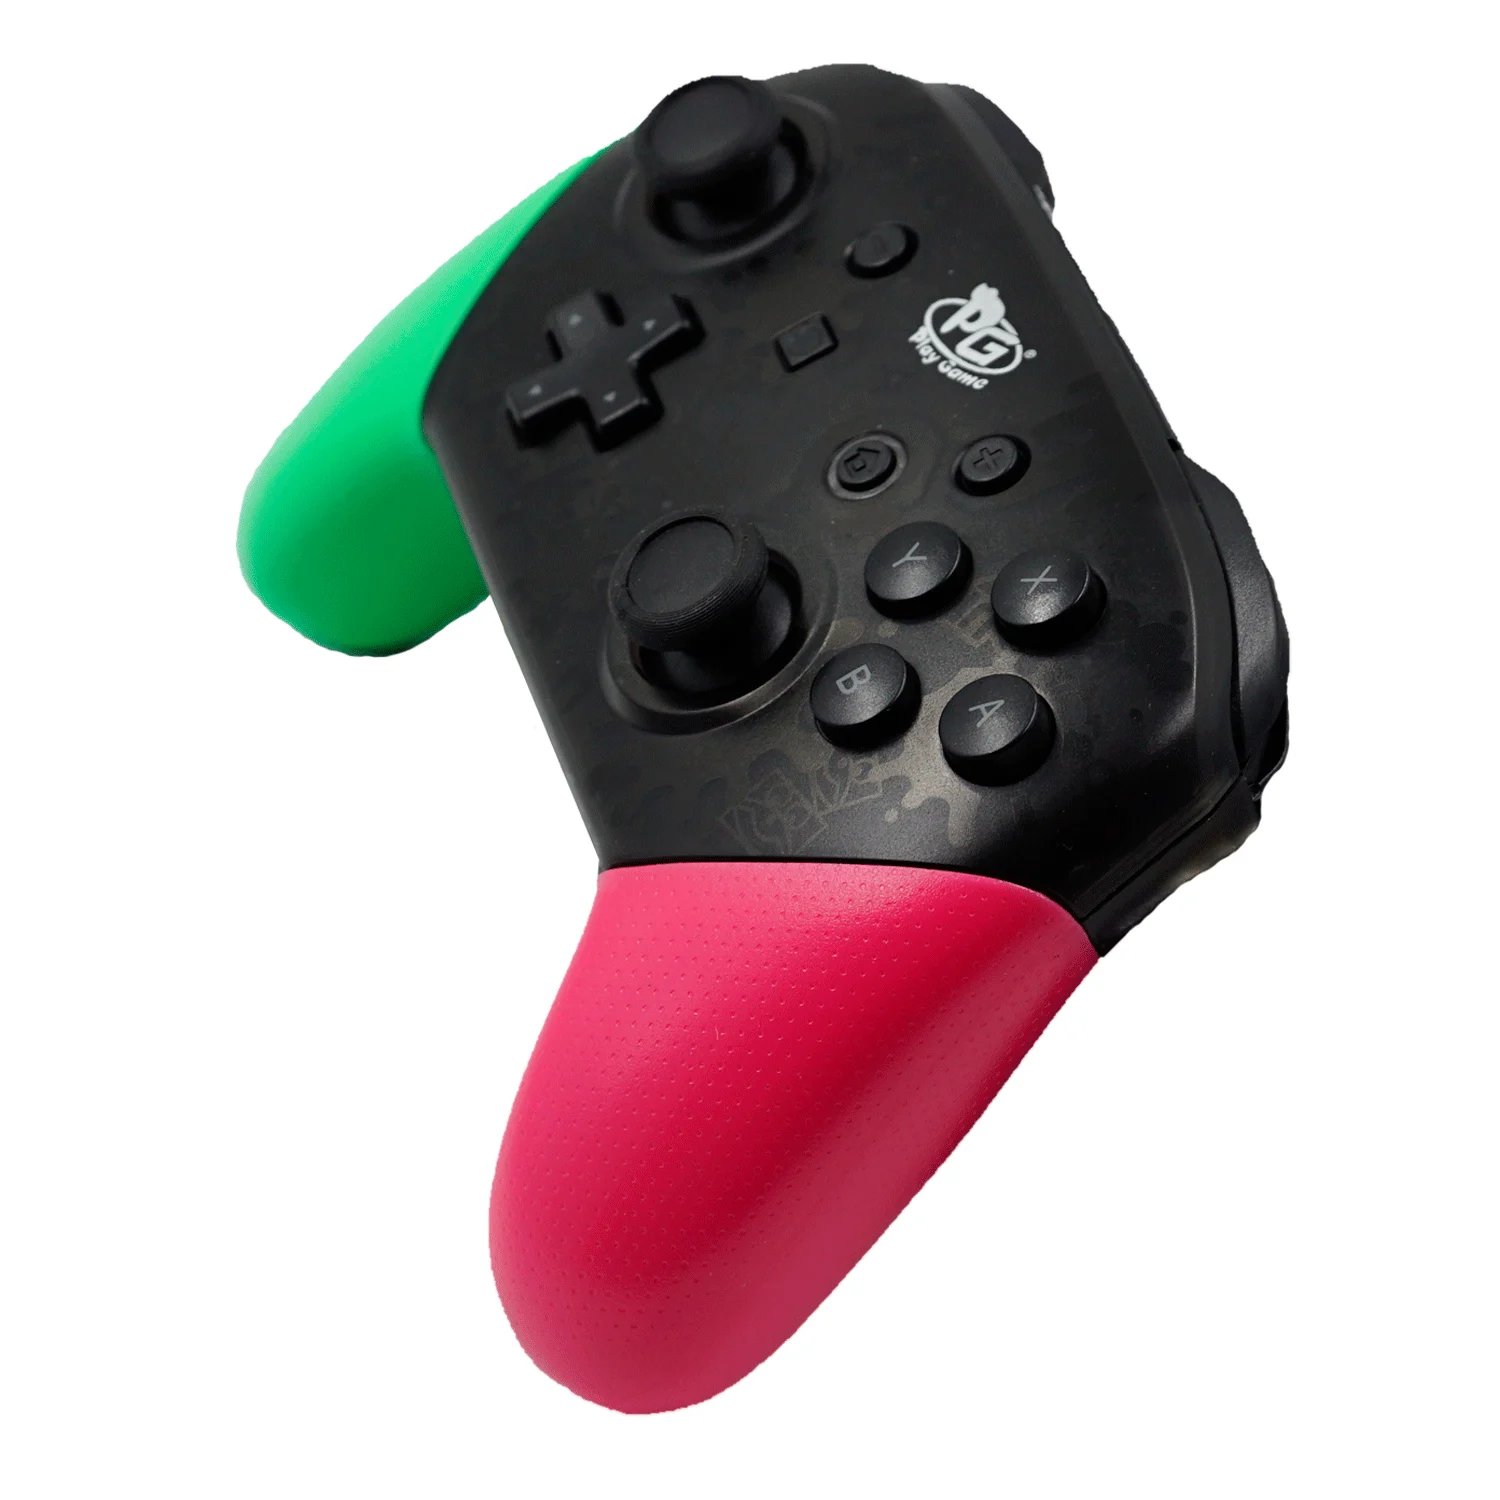 Controle Nintendo Switch Pro Play Game - Splatoon 2 Edition Play Game